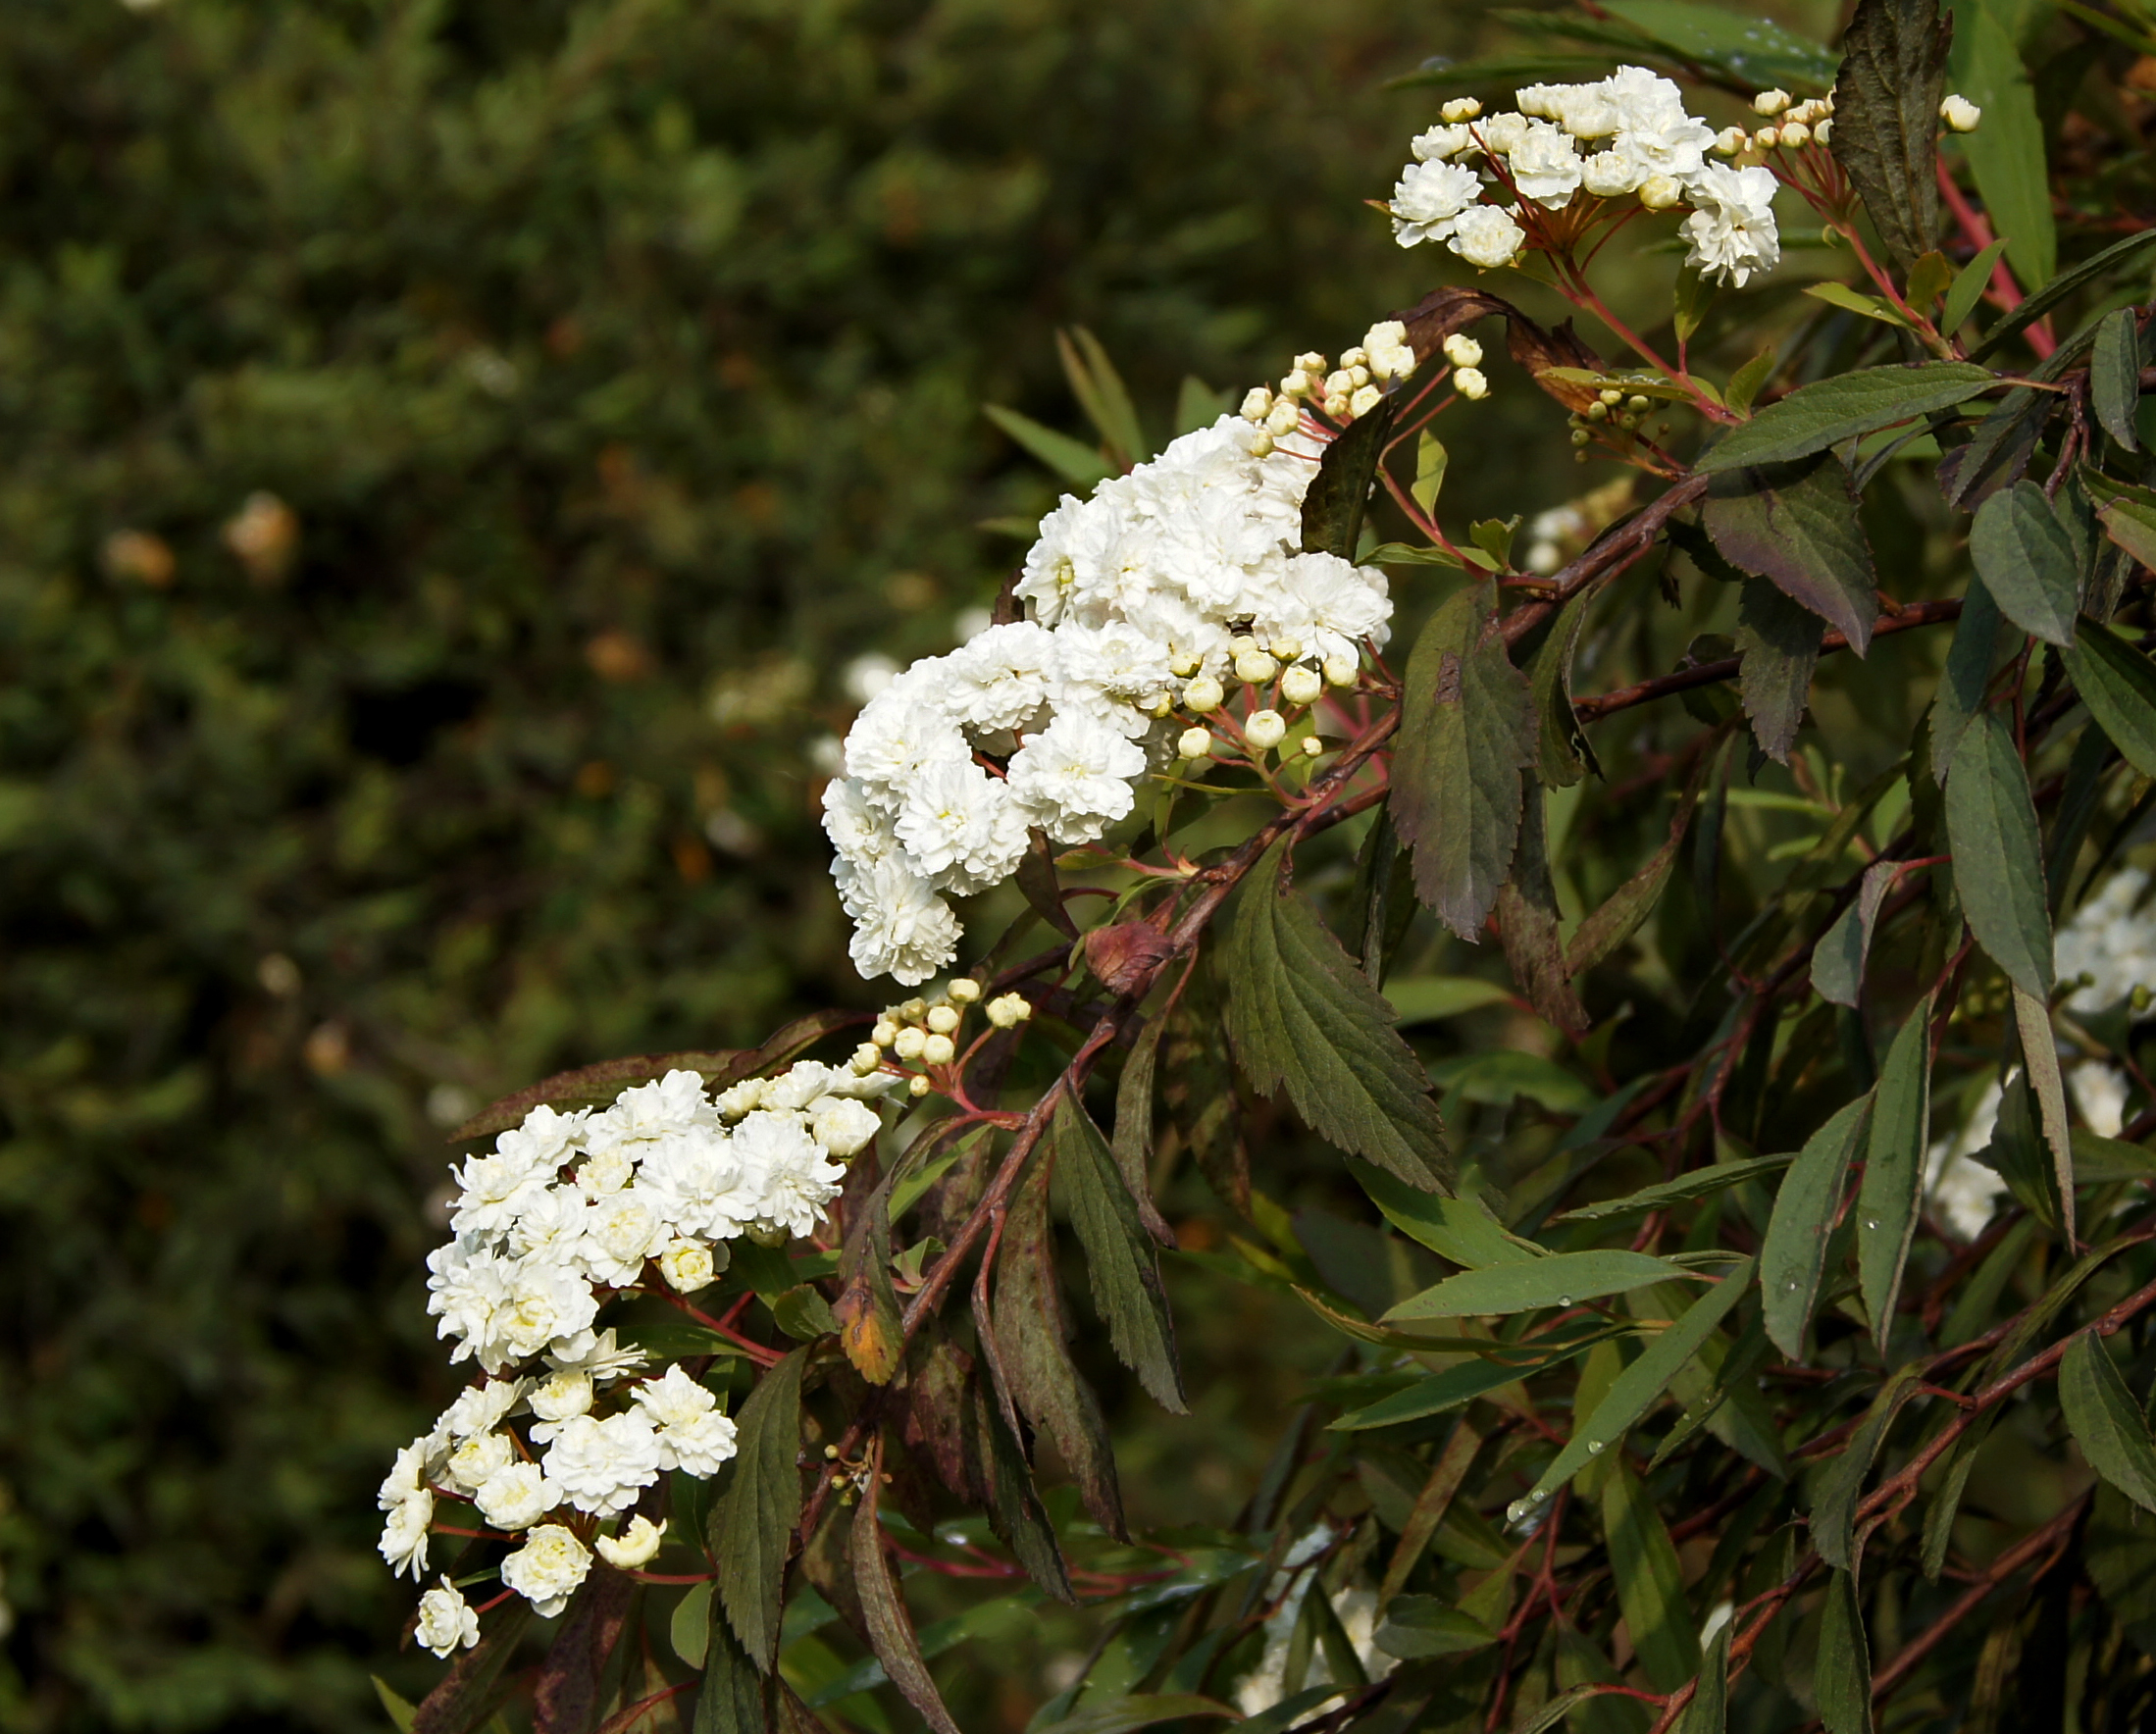 A branch Spiraea cantoniensis branch with red stems and clusters of flowers and buds